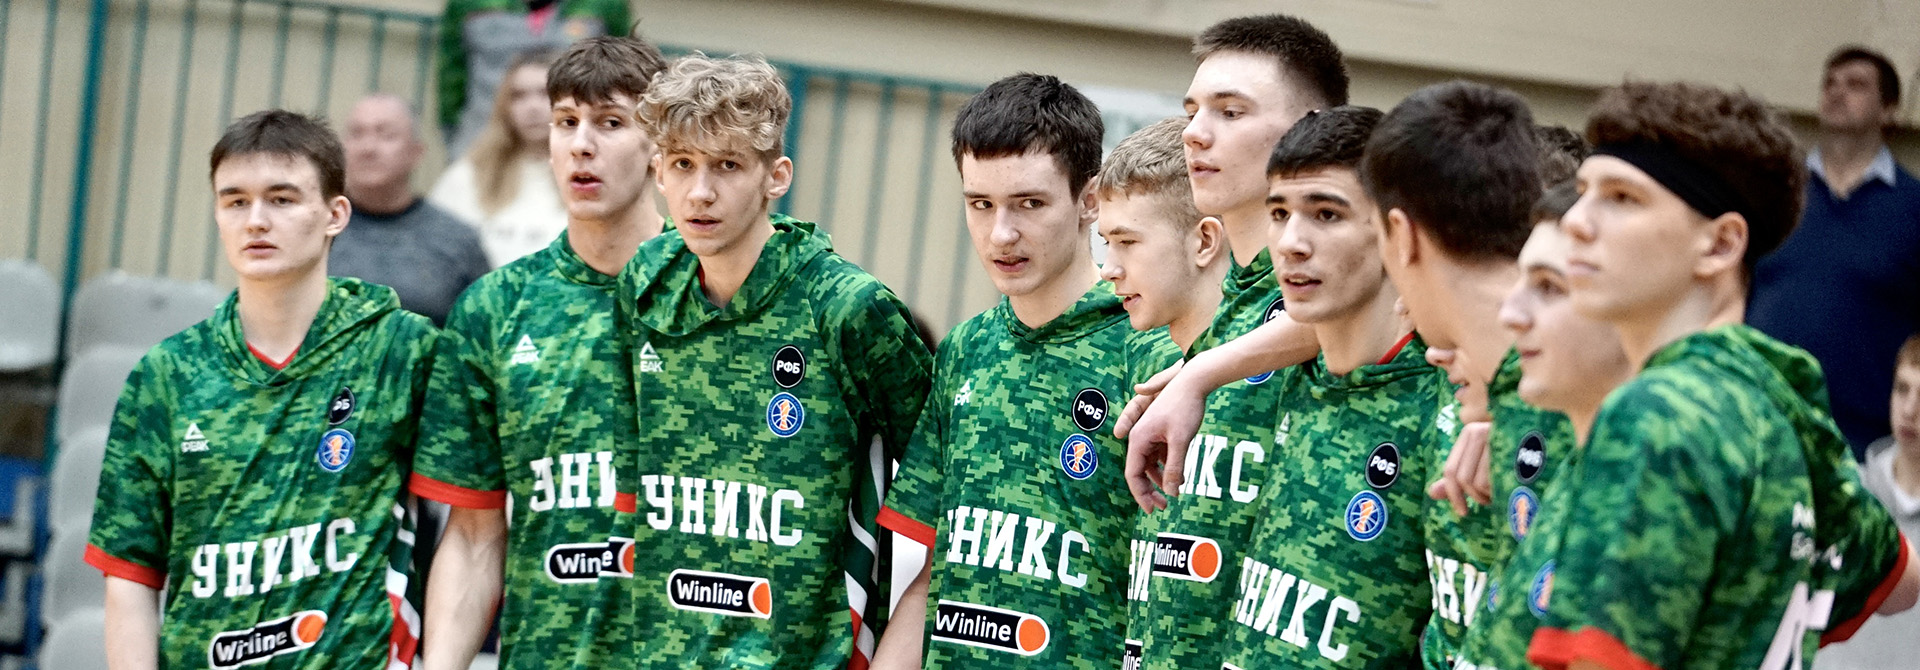 UNICS-Juniors: 2 out of 5 in the second round